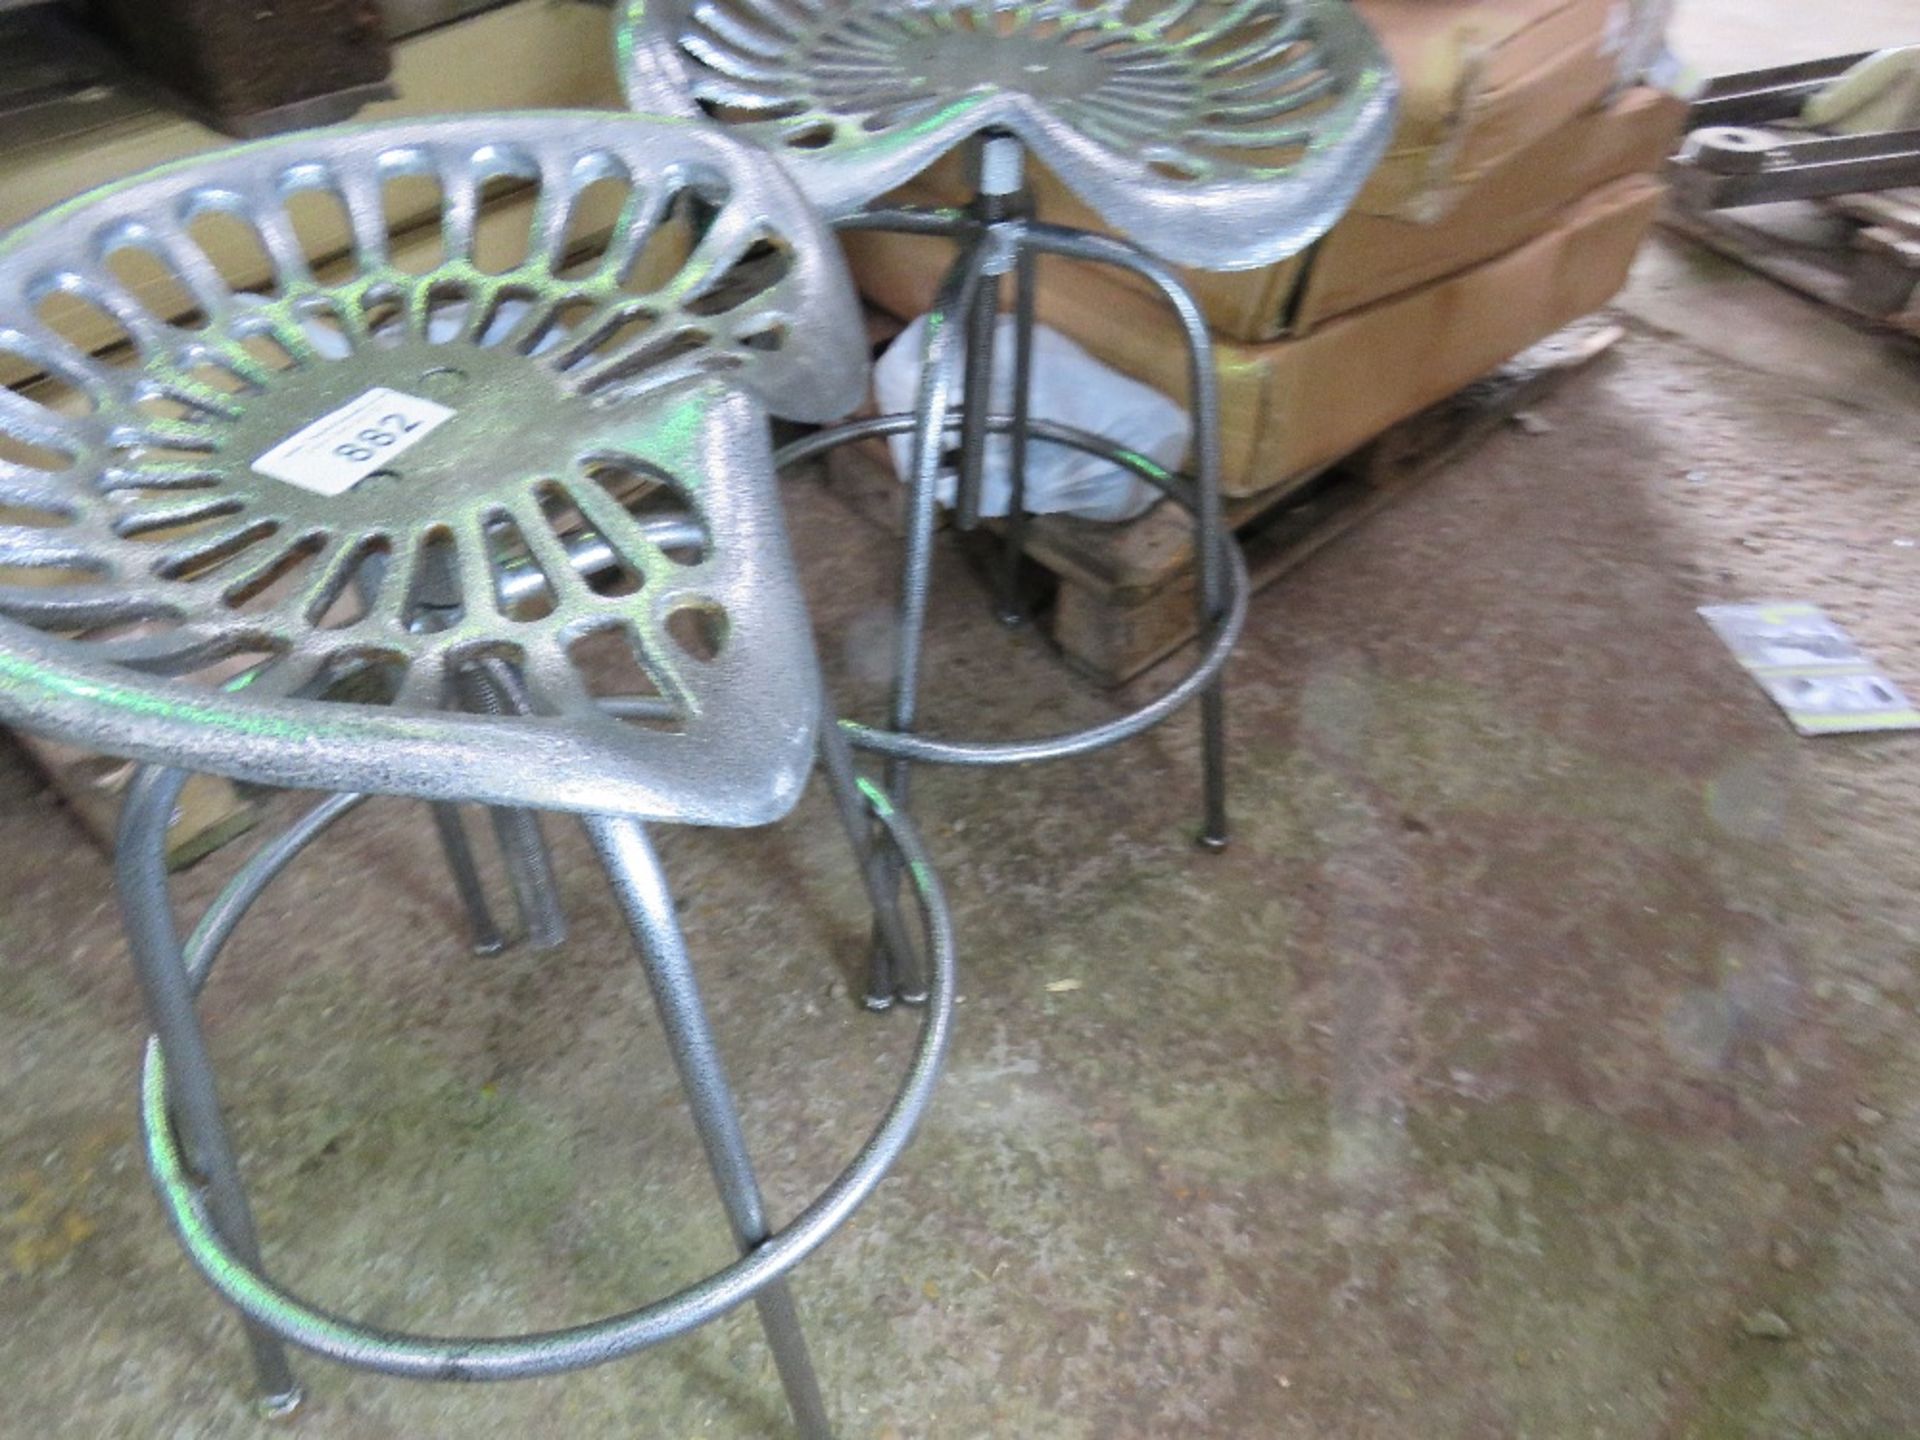 2 X METAL ADJUSTABLE IMPLEMENT SEATS / STOOLS. NO VAT ON HAMMER PRICE. - Image 3 of 3